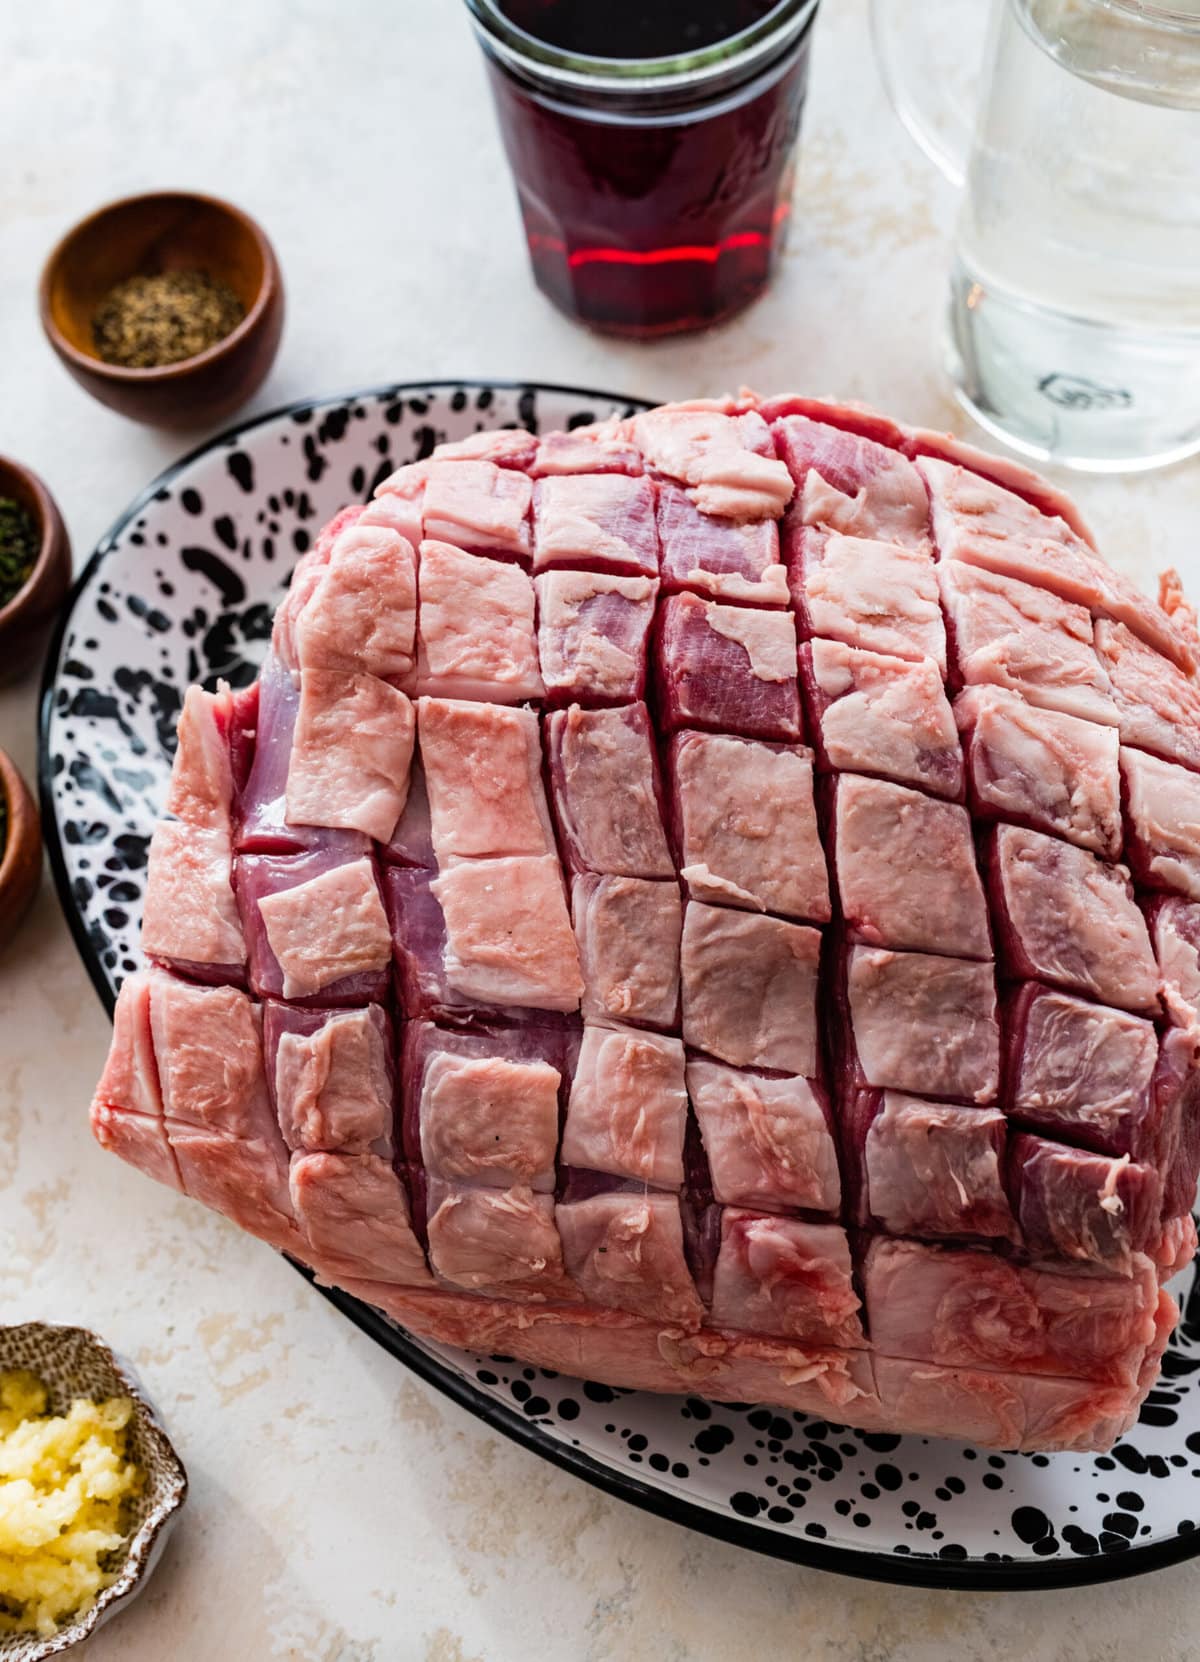 How to make roast leg of lamb step-by-step: scoring the top of the lamb.